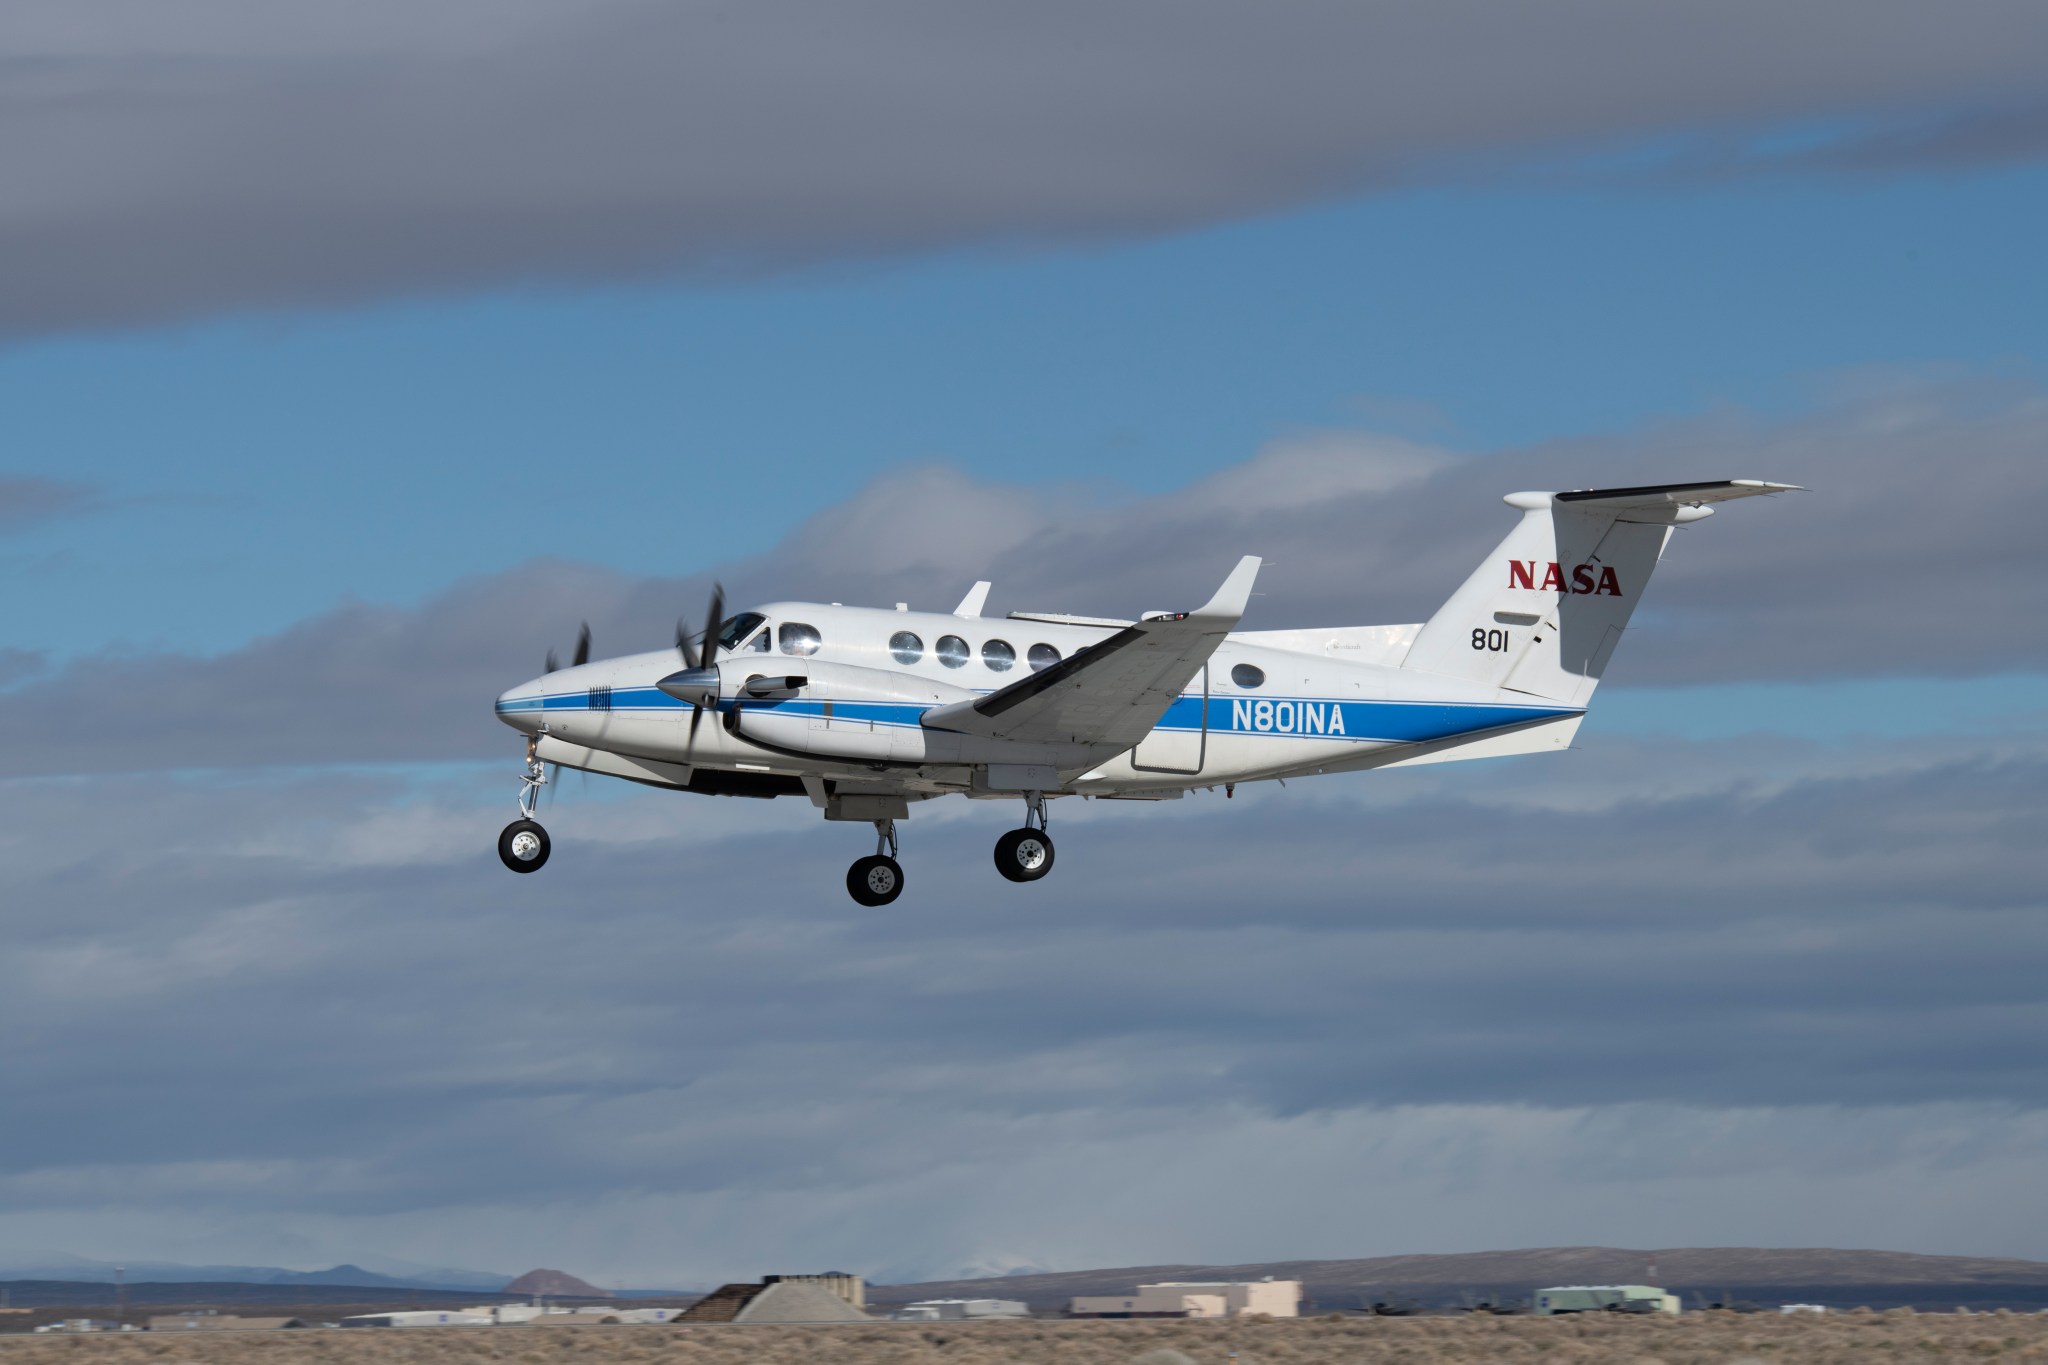 Aircraft in low flight with landing gear down. A desert town and cloudy blue sky seen in the background.